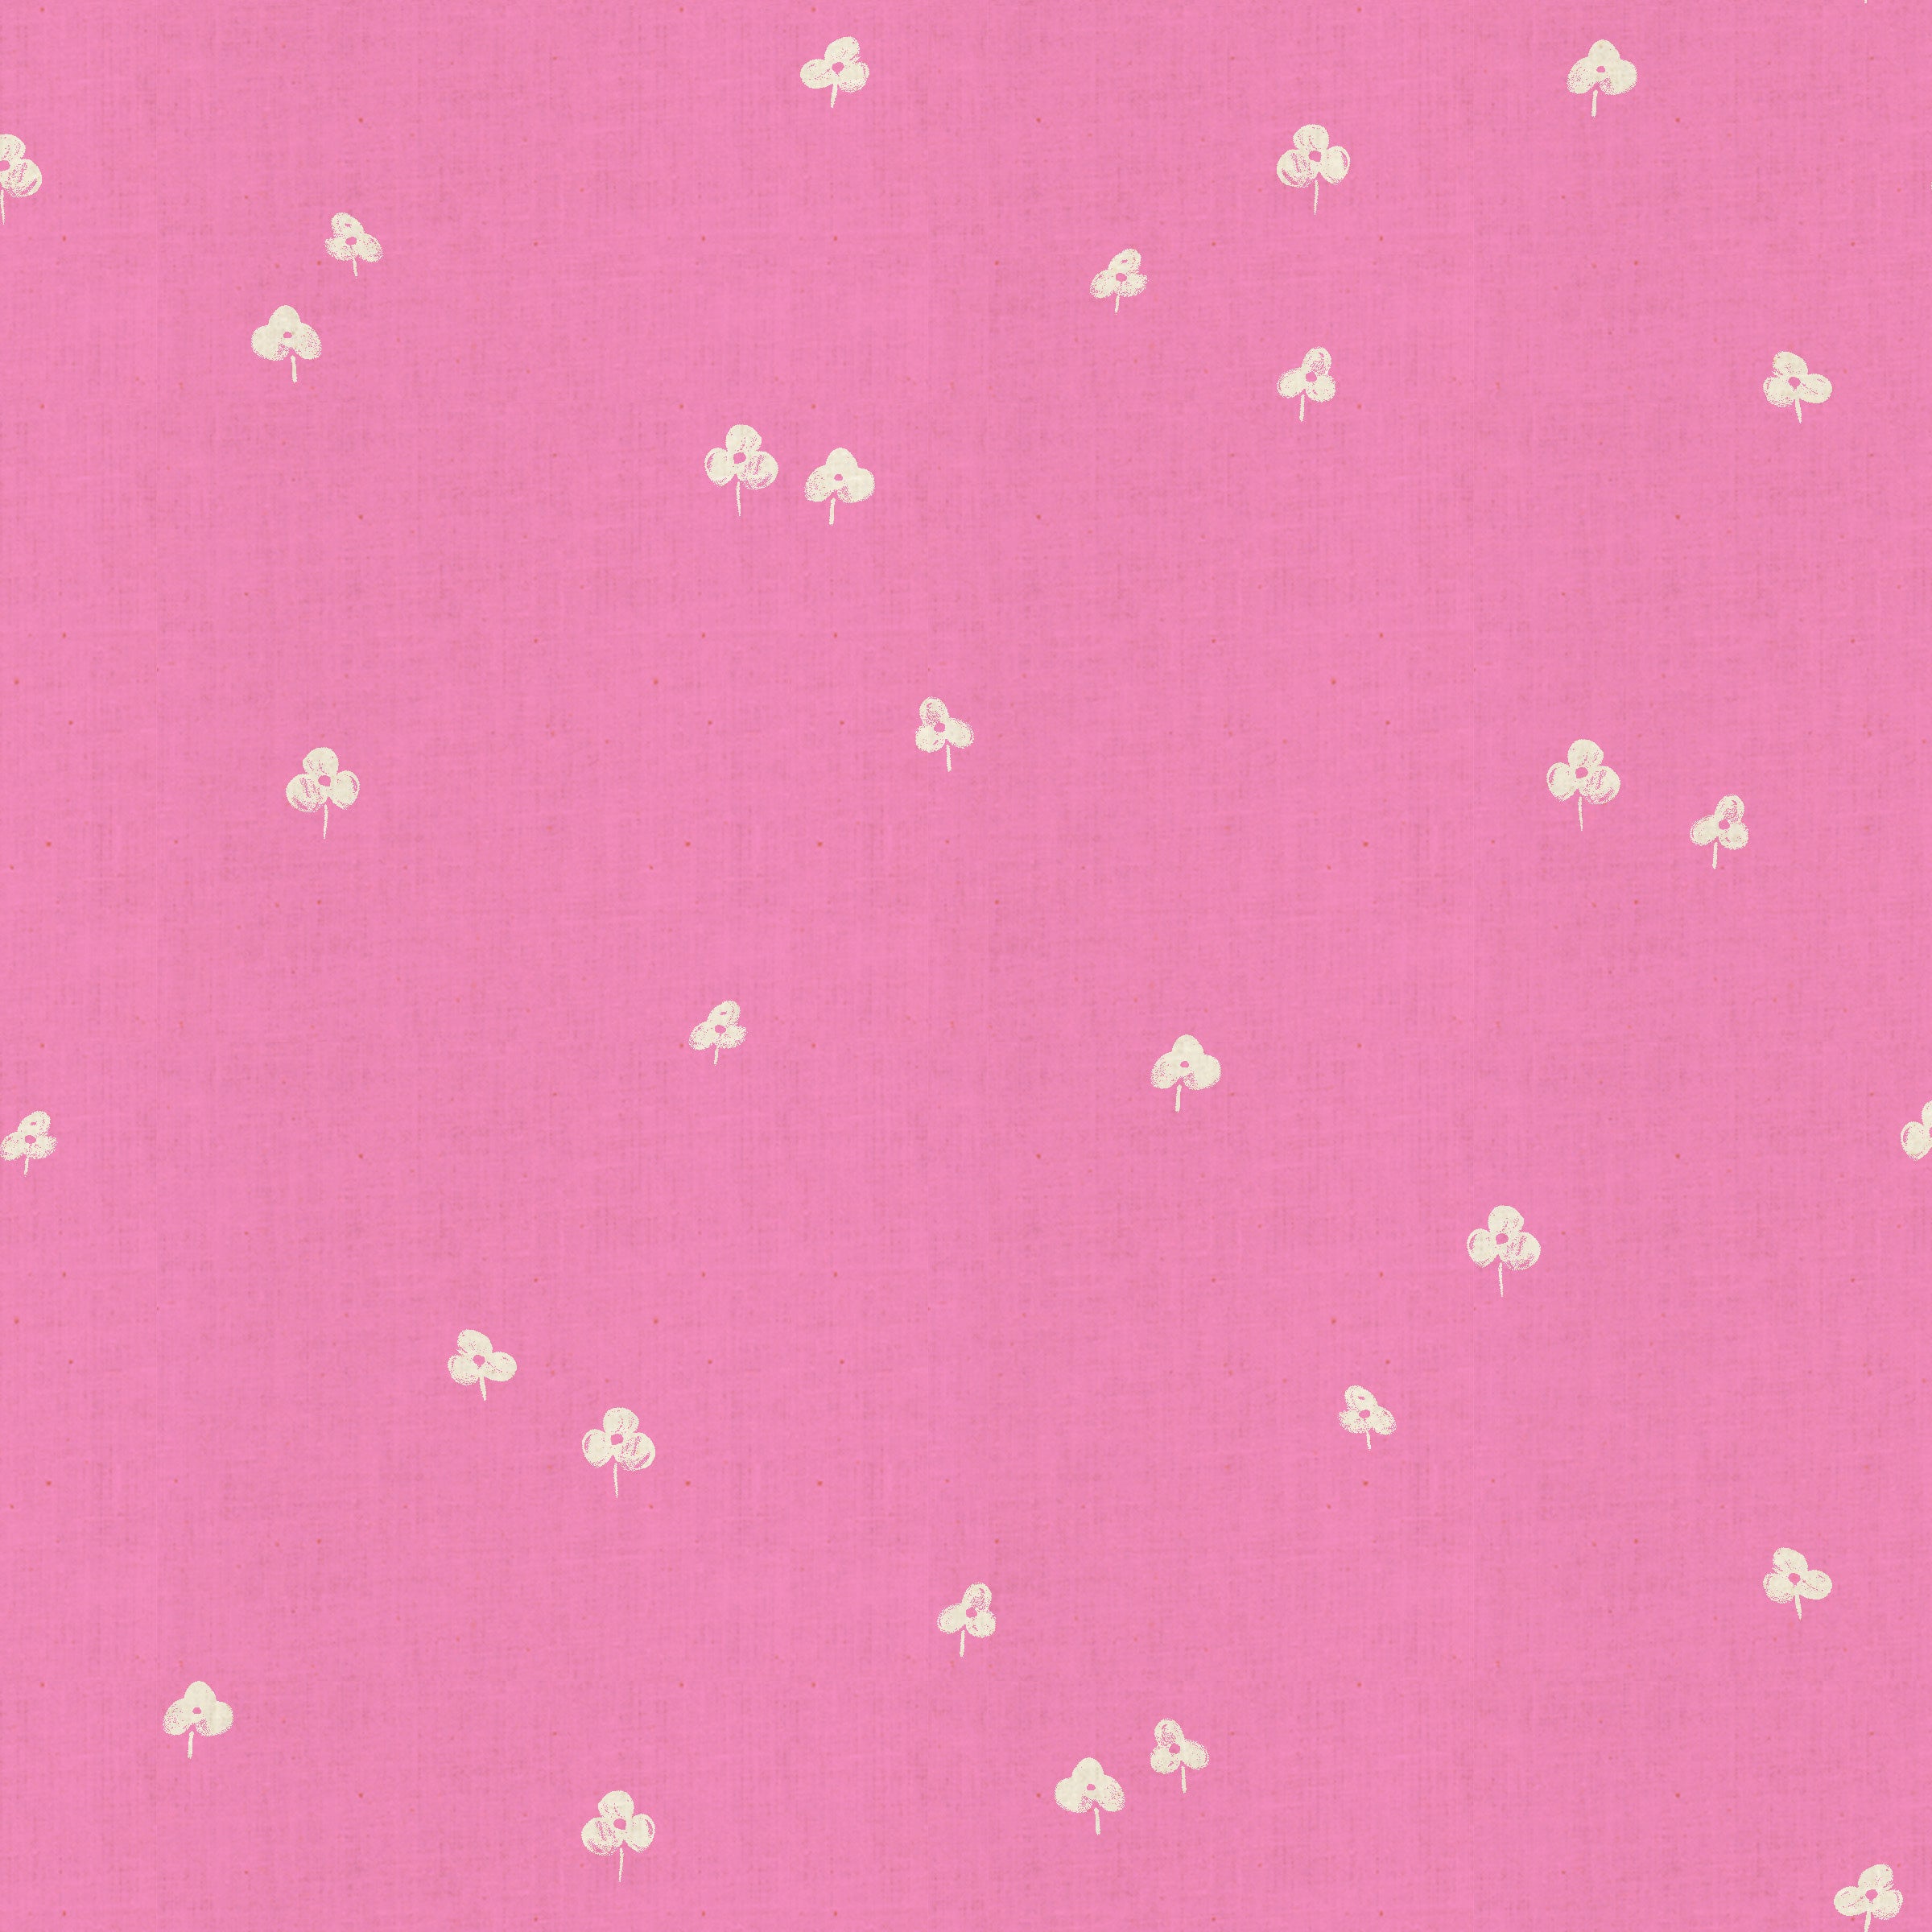 Cotton + Steel Basics Quilt Fabric - Clover and Over in Sweet Pea Pink, Unbleached - CS105-SW3U